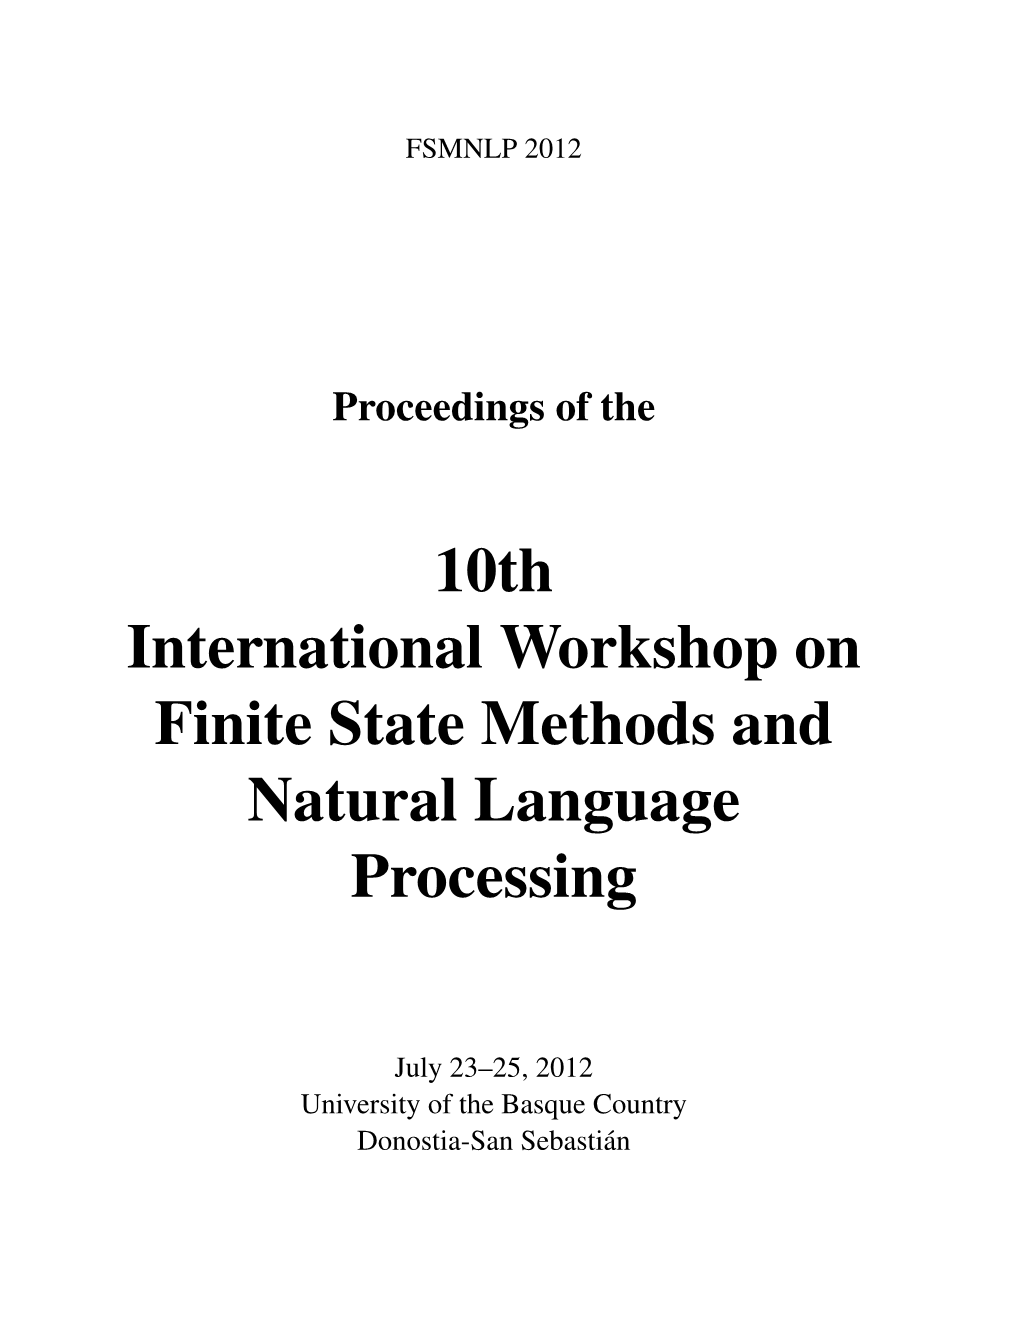 Proceedings of the 10Th International Workshop on Finite State Methods and Natural Language Processing, Pages 1–9, Donostia–San Sebastian,´ July 23–25, 2012